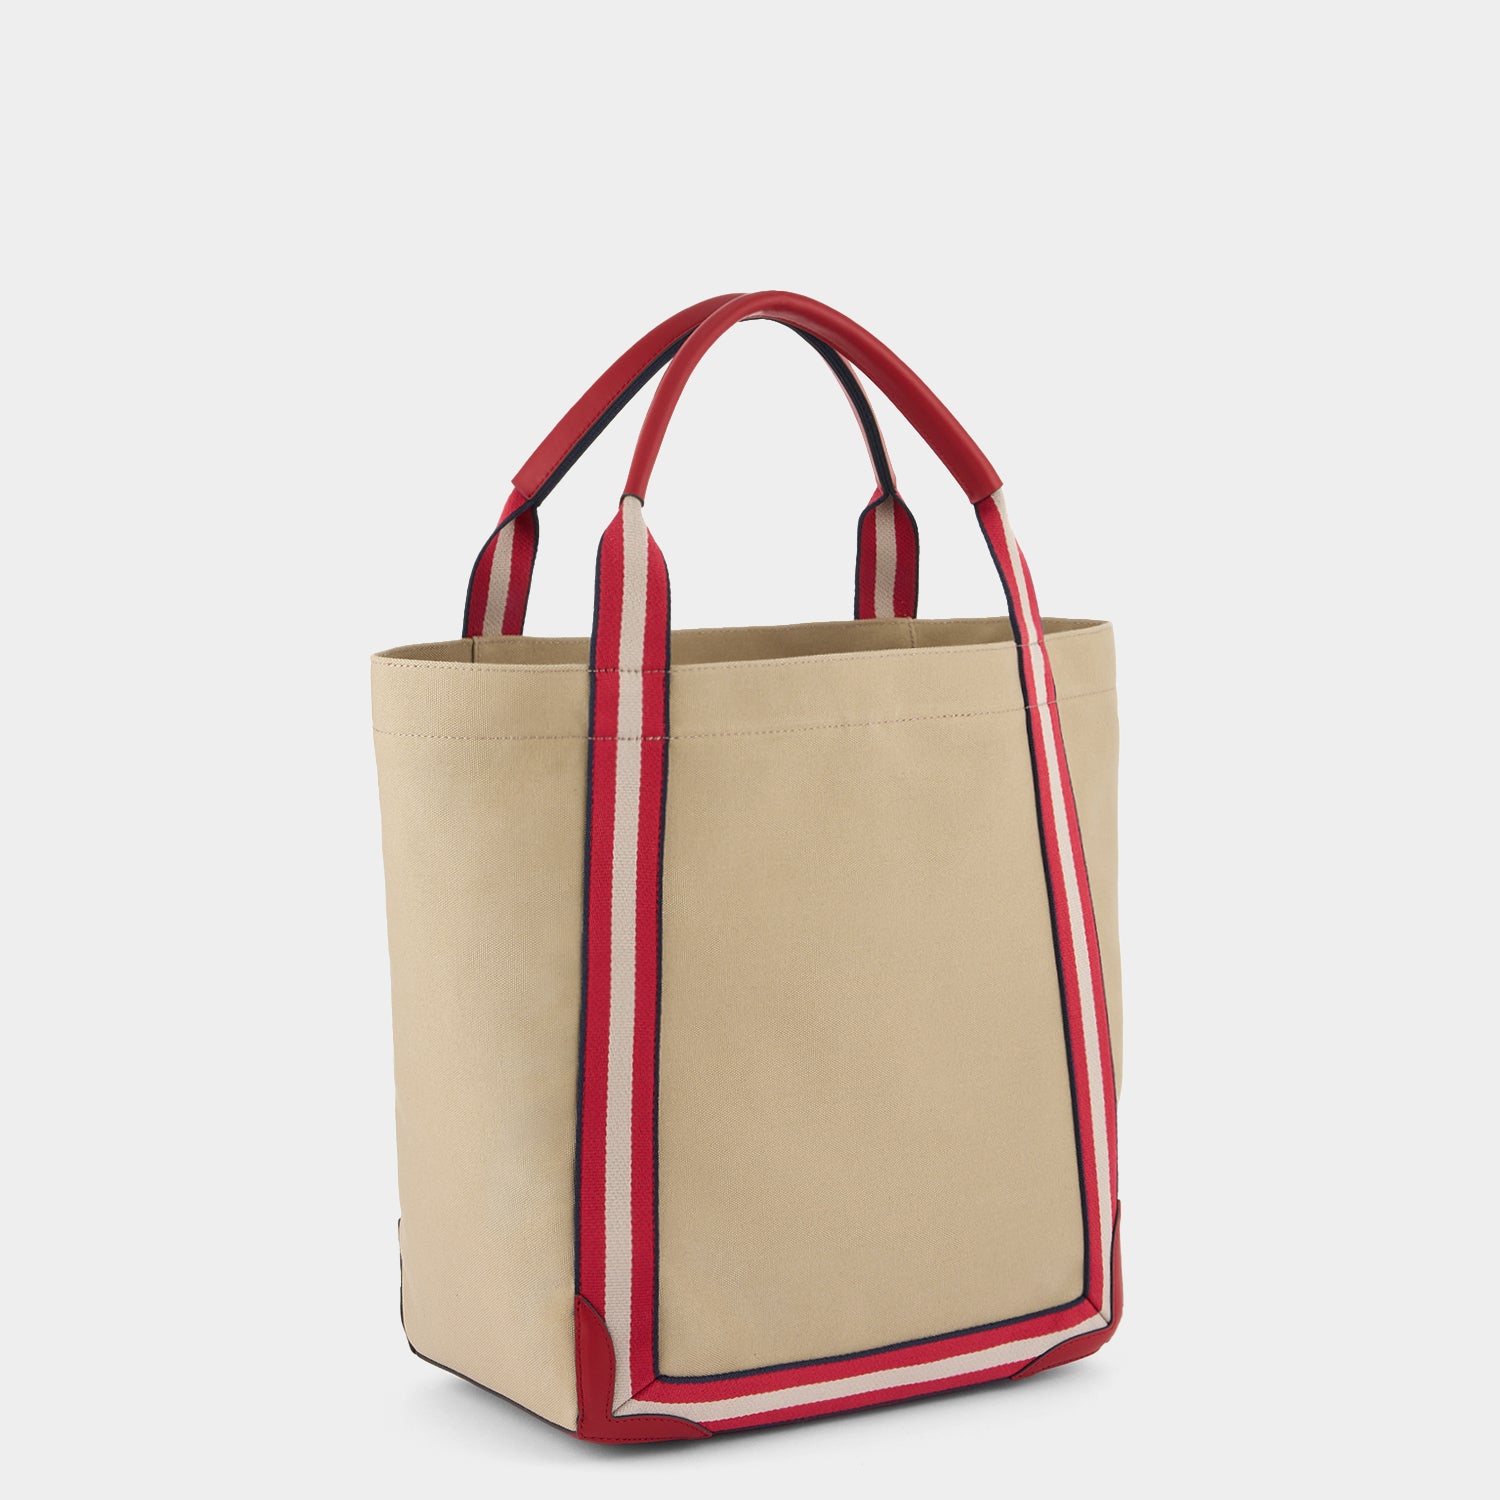 Bespoke Walton Pont Tote -

                  
                    Circus Leather in Red -
                  

                  Anya Hindmarch UK
